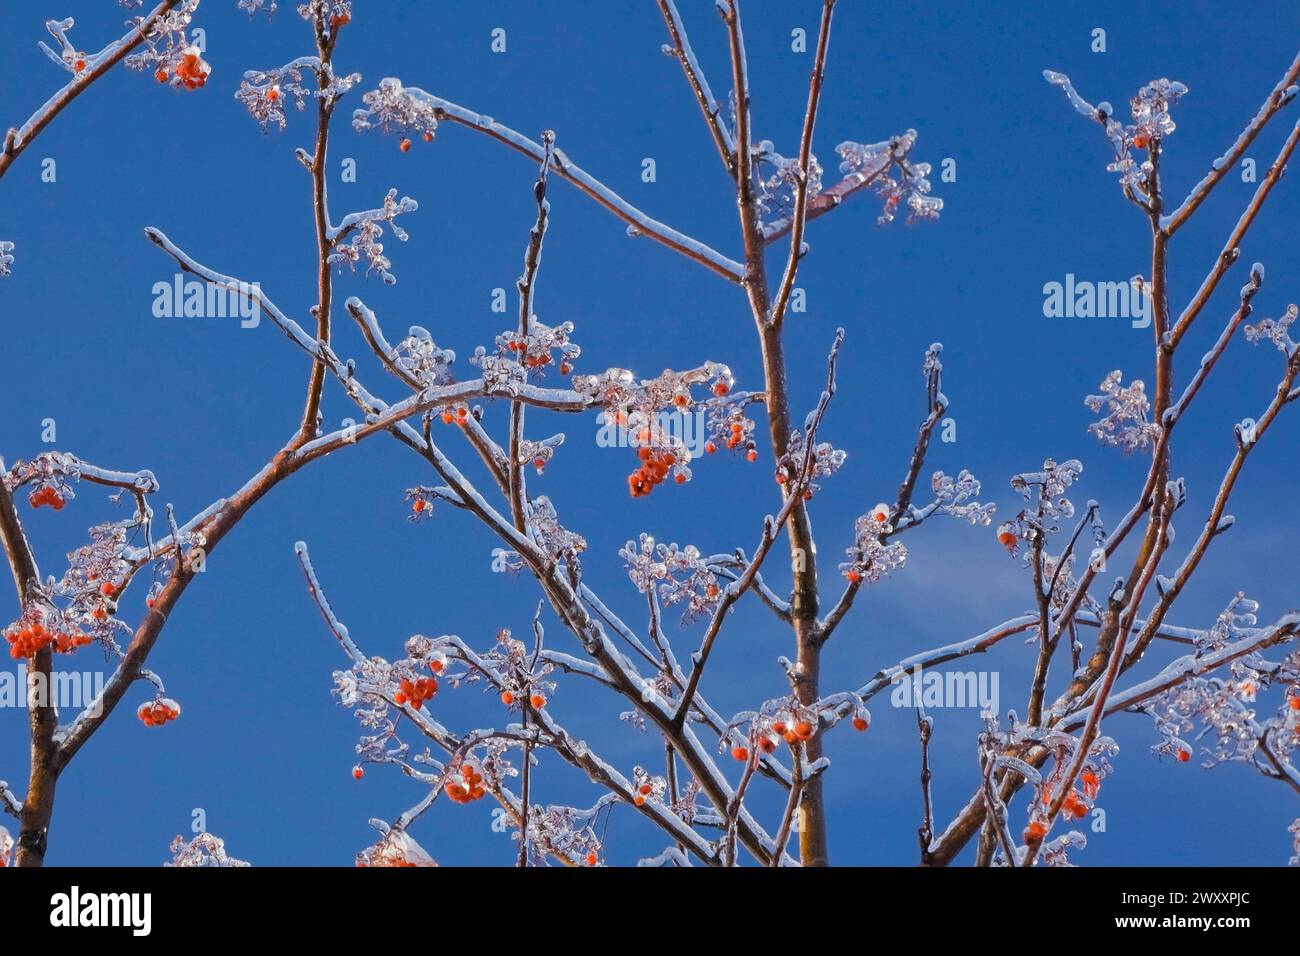 Close-up of Sorbus americana, American Mountain Ash tree branches with ice covered orange red berries against a blue sky in winter, Quebec, Canada Stock Photo